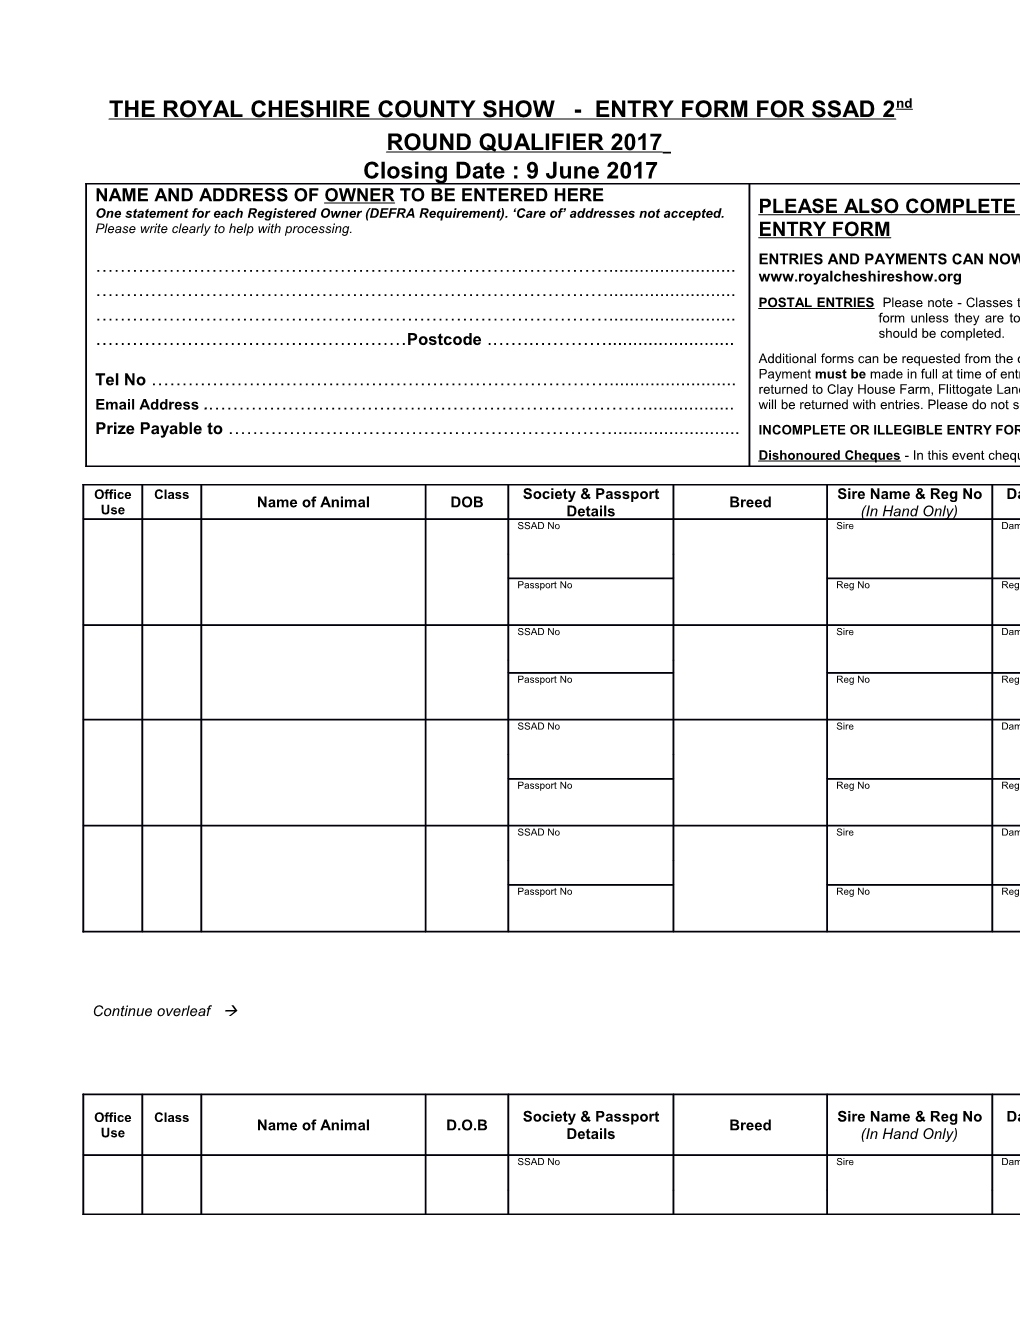 Cheshire Agricultural Society - Entry Form for Dairy Goat Section